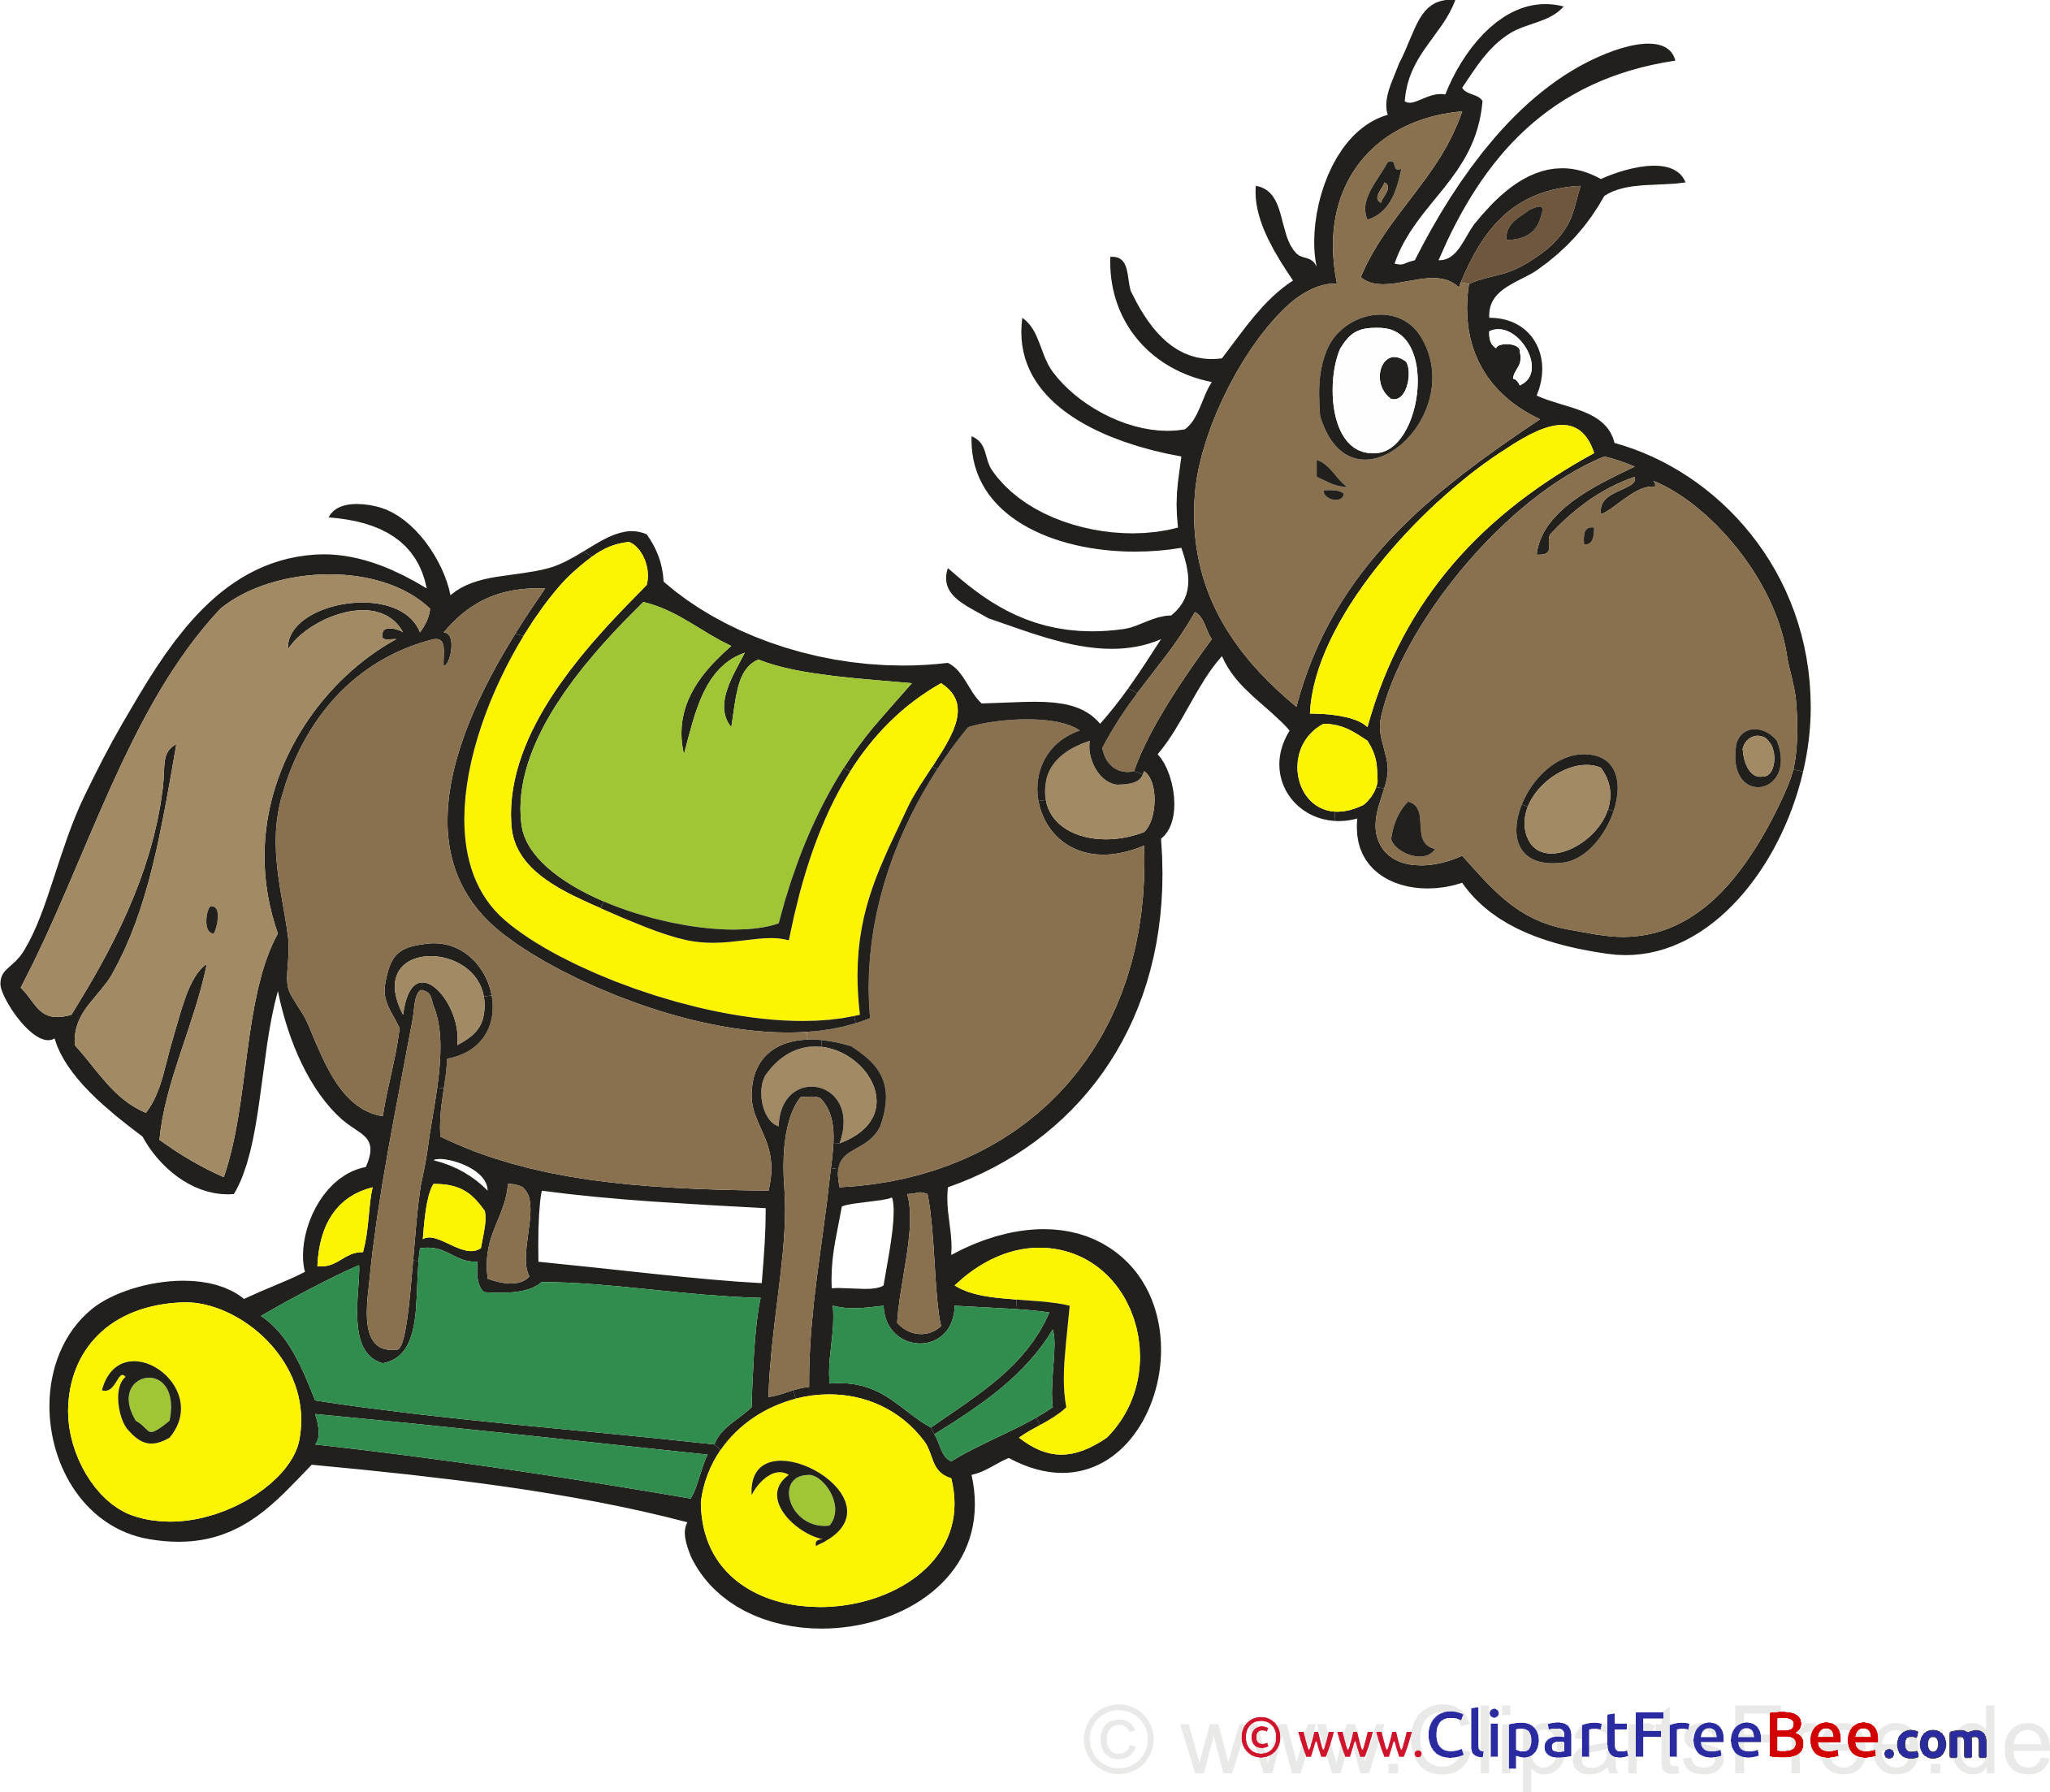 Toy Horse free Illustration download